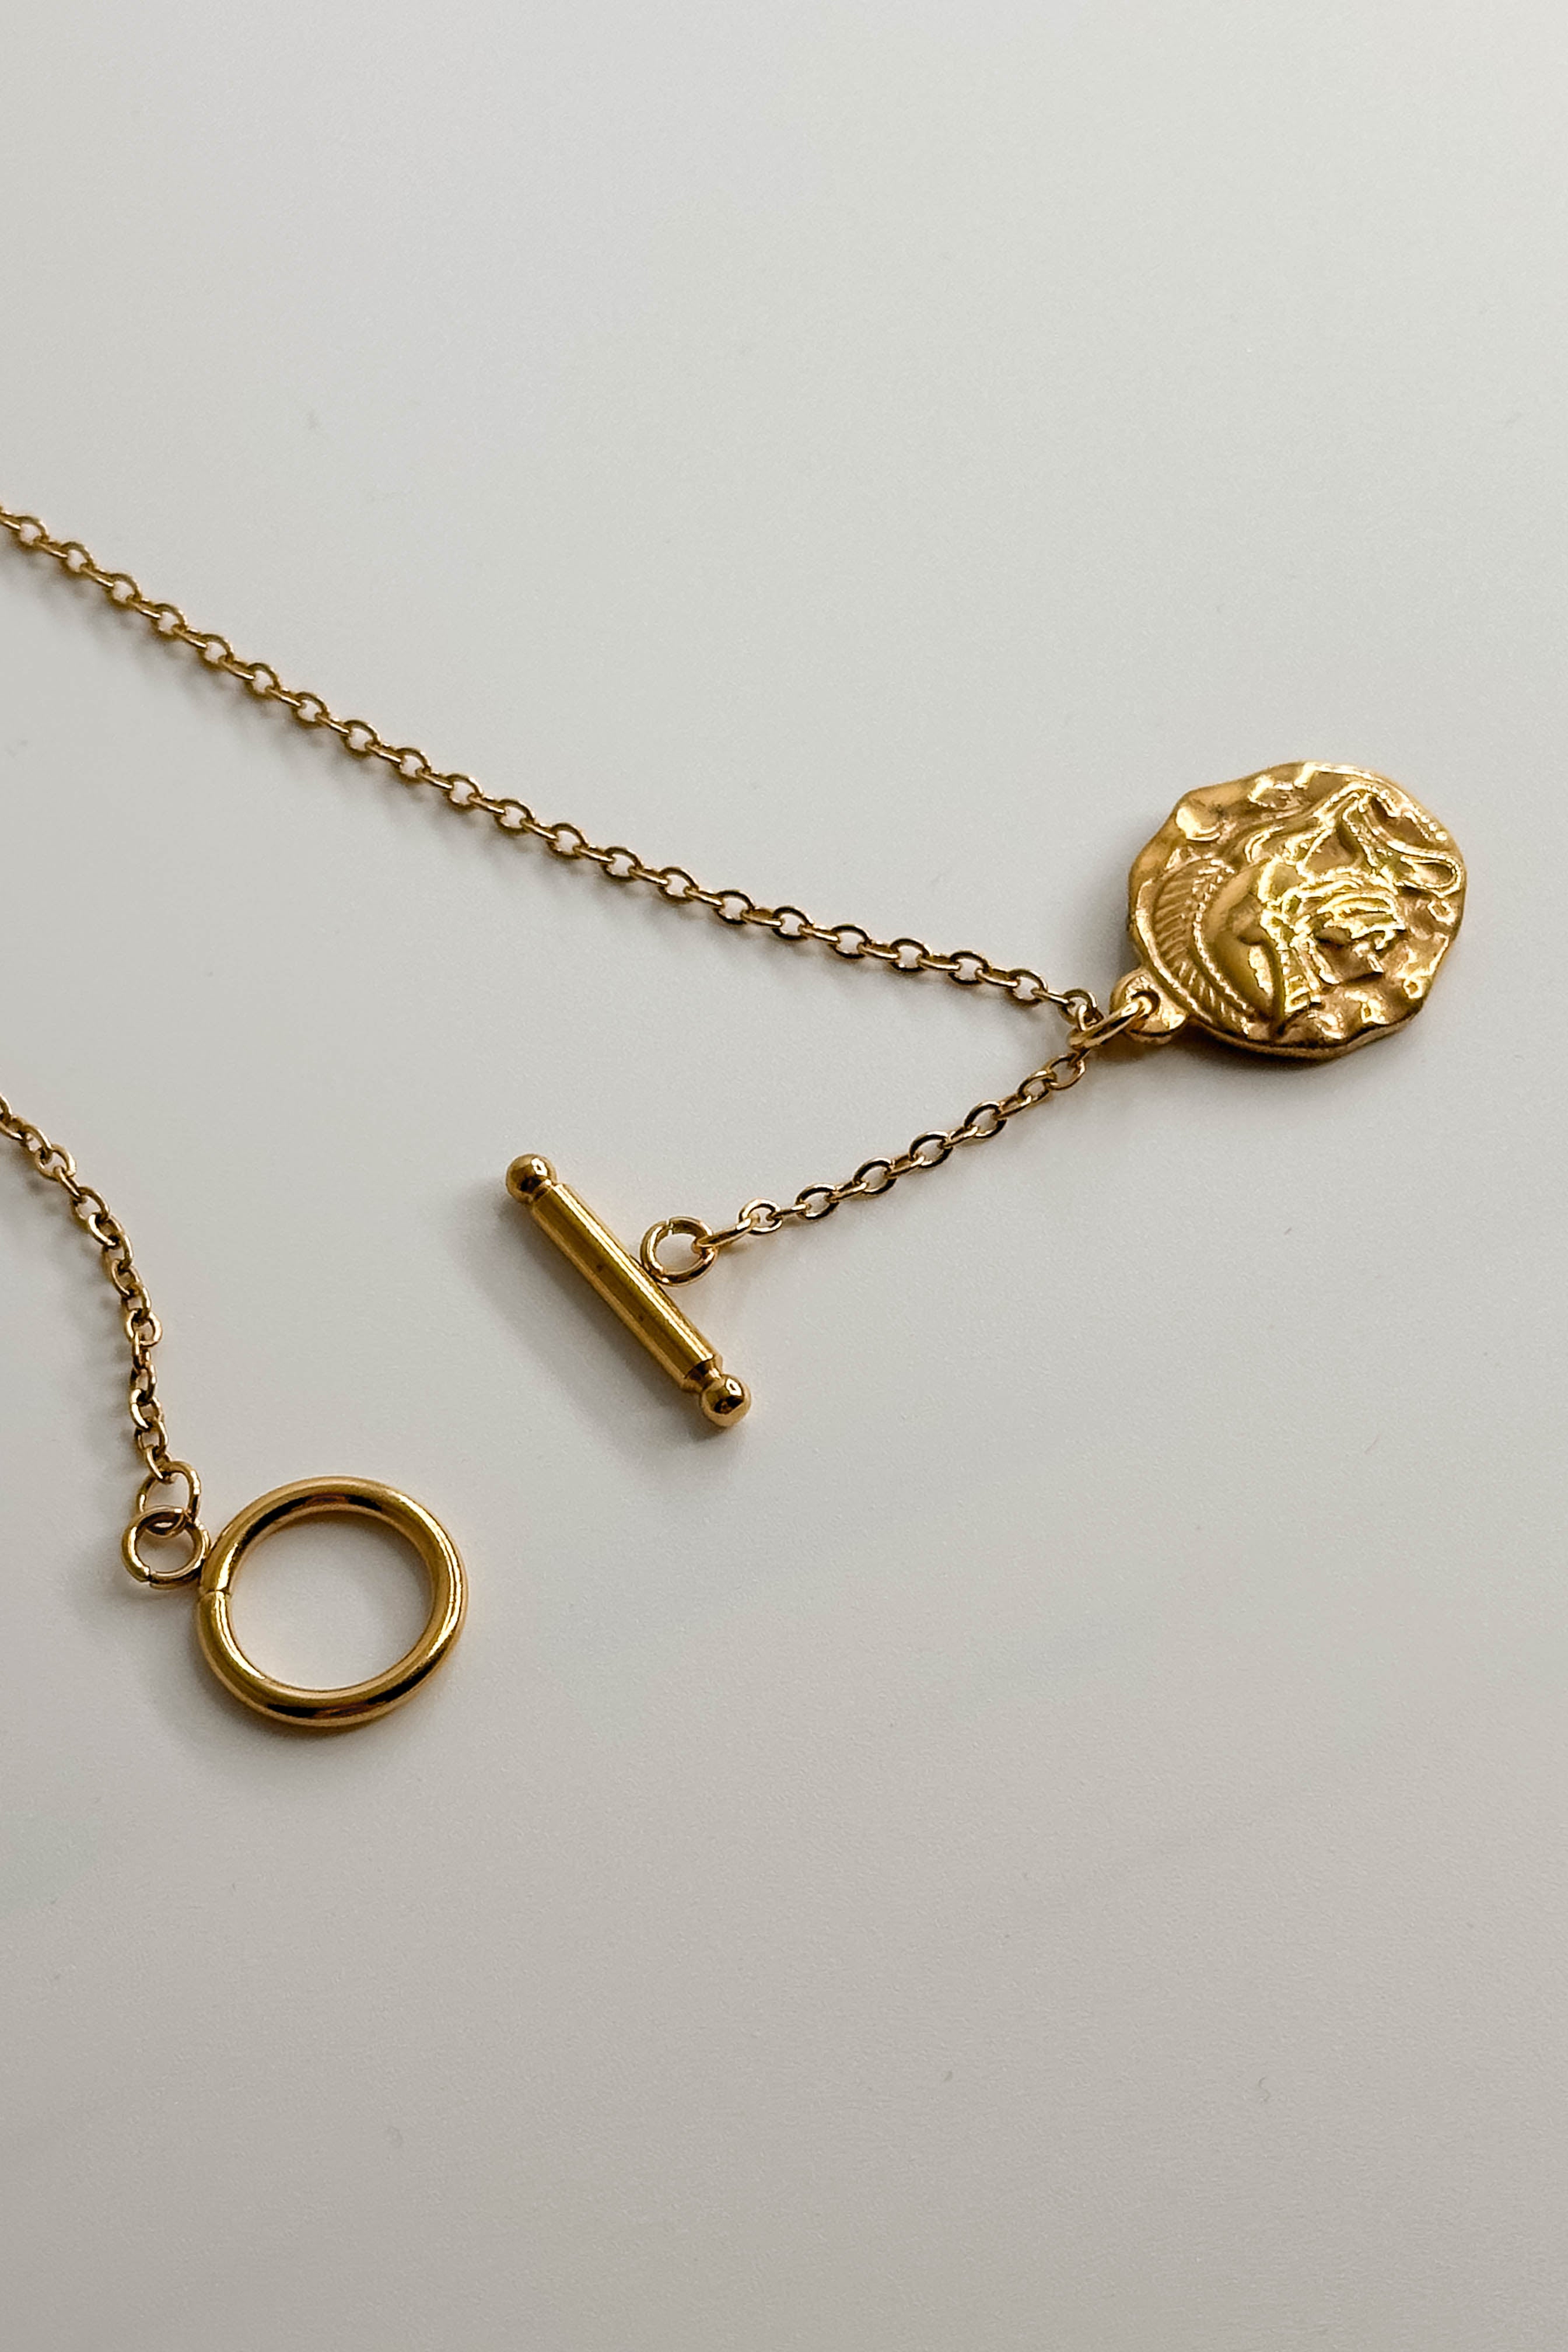 Close-up image of the Alexandra Gold Medallion Necklace against a white background. Necklace has gold chain with toggle closure and gold circle medallion with side profile of a gladiator. Necklace is shown unhooked